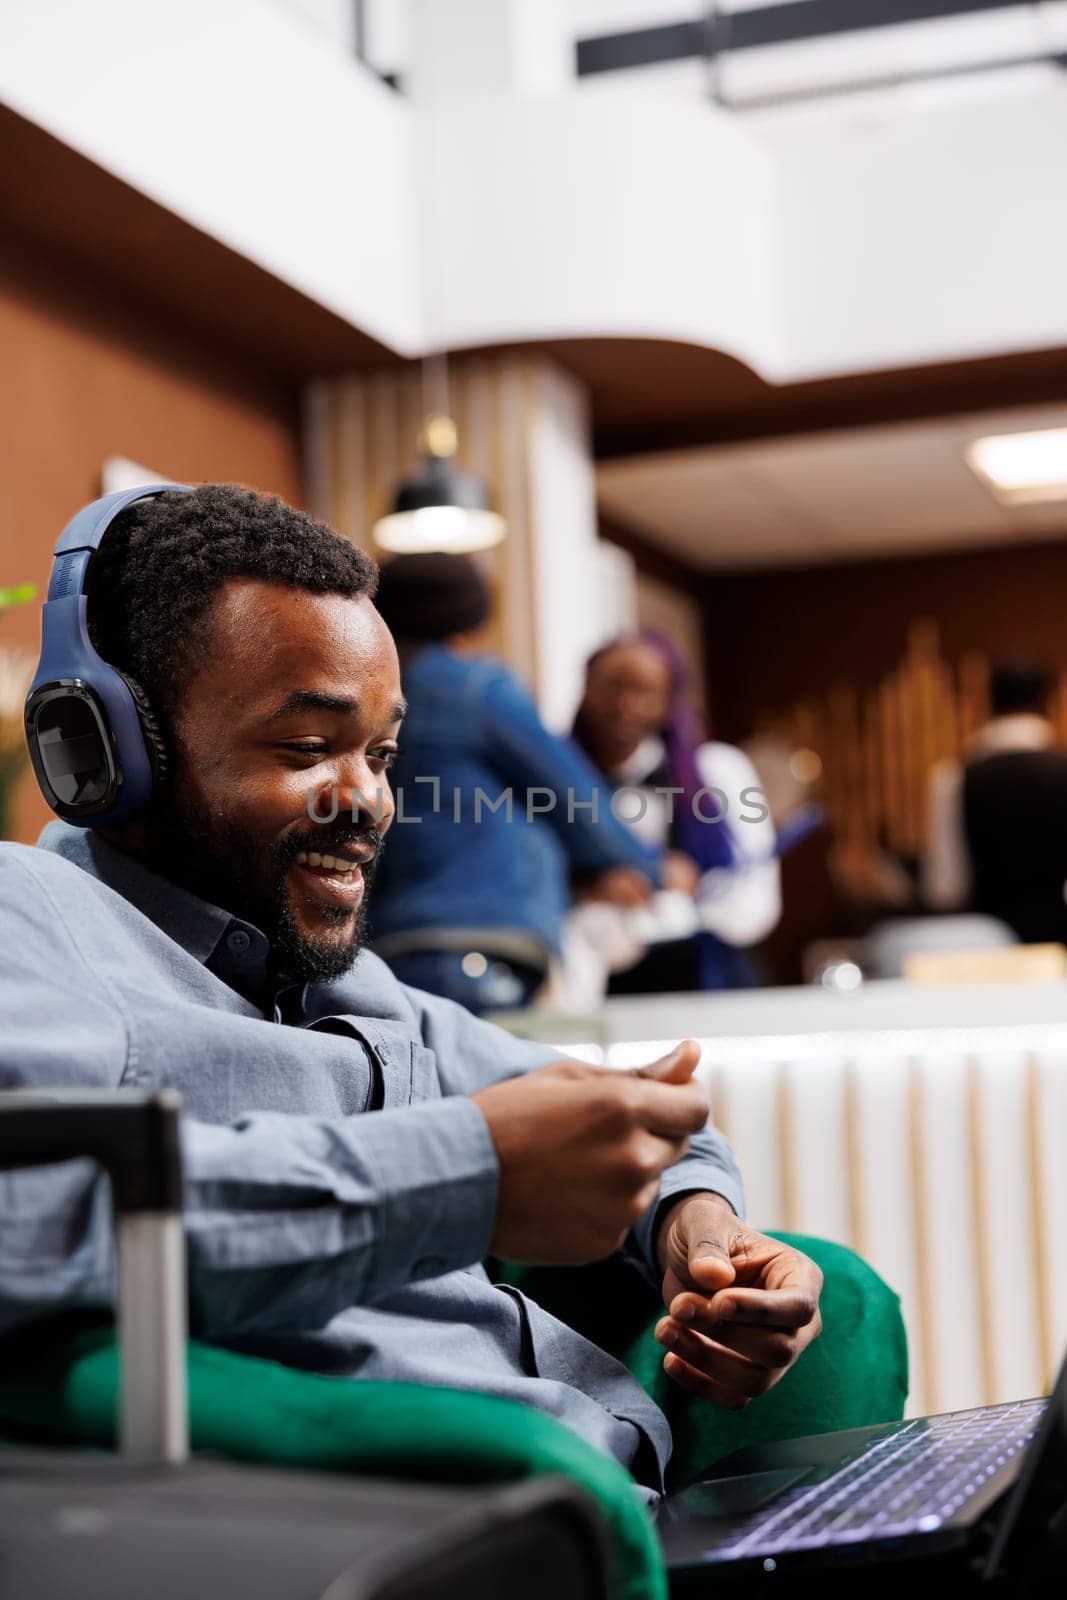 African American businessman wearing headphones using laptop for video call, waiting in hotel lounge area for check-in. Smiling black guy entrepreneur participating in virtual meeting while traveling